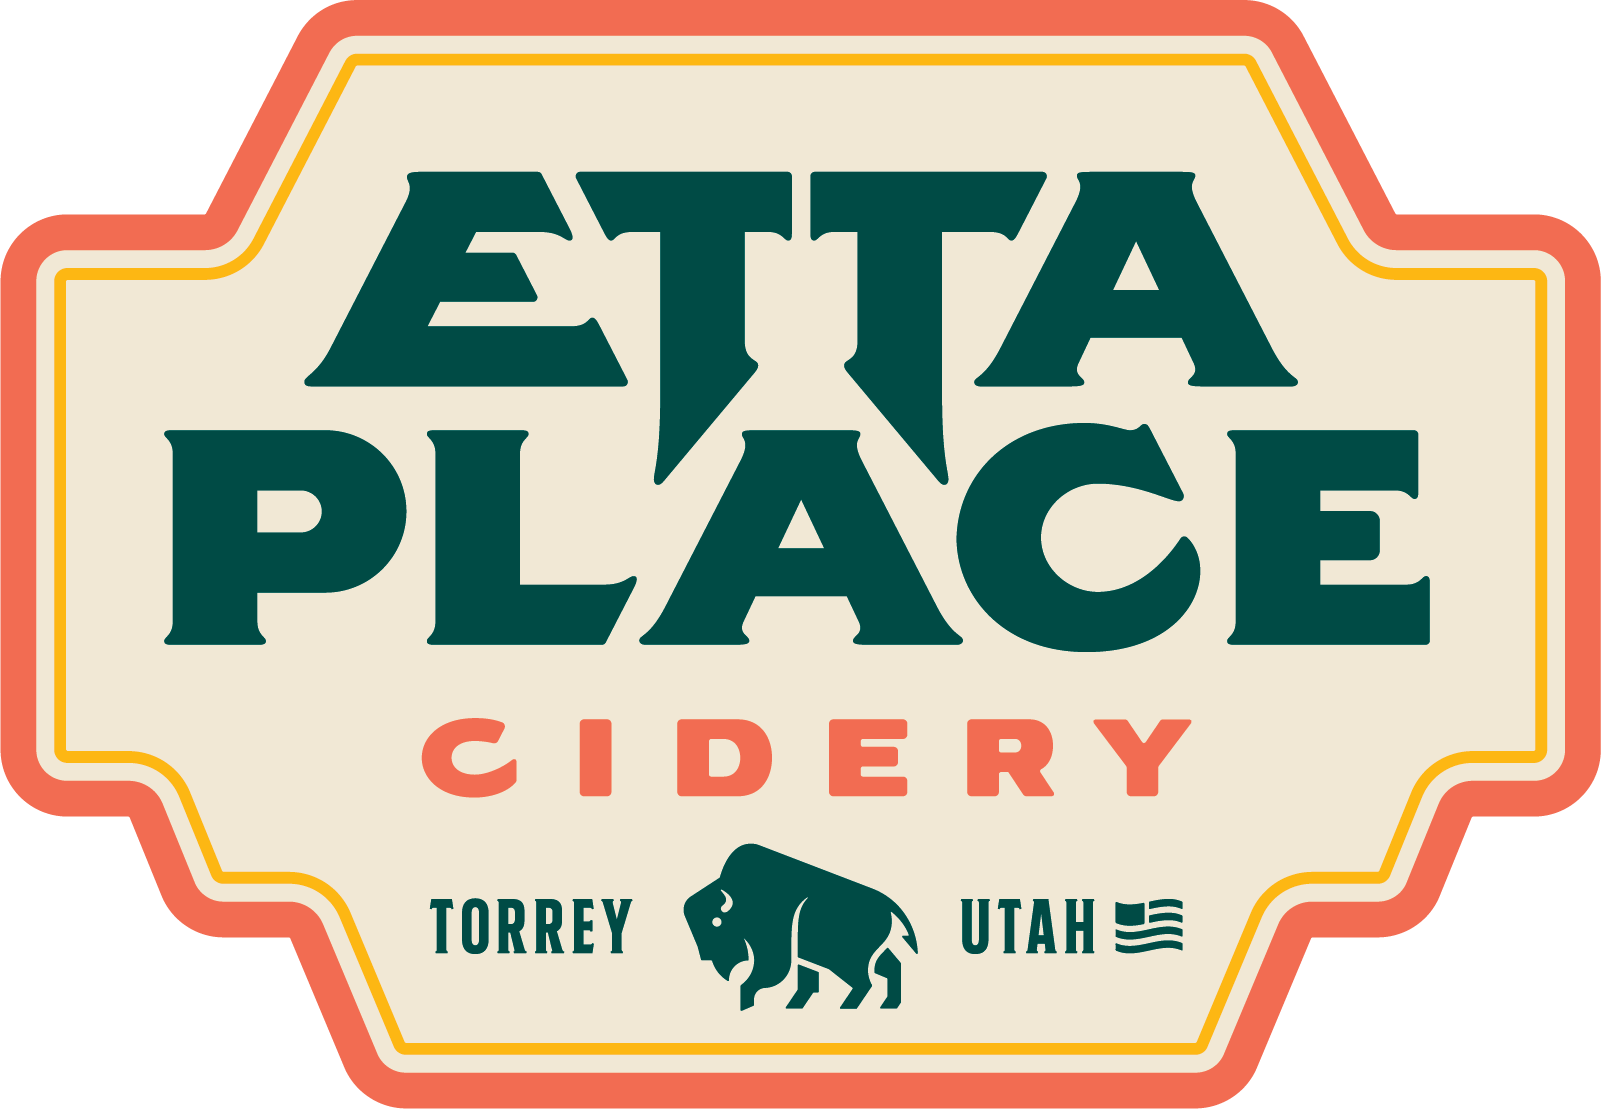 Etta Place Cidery & Taproom